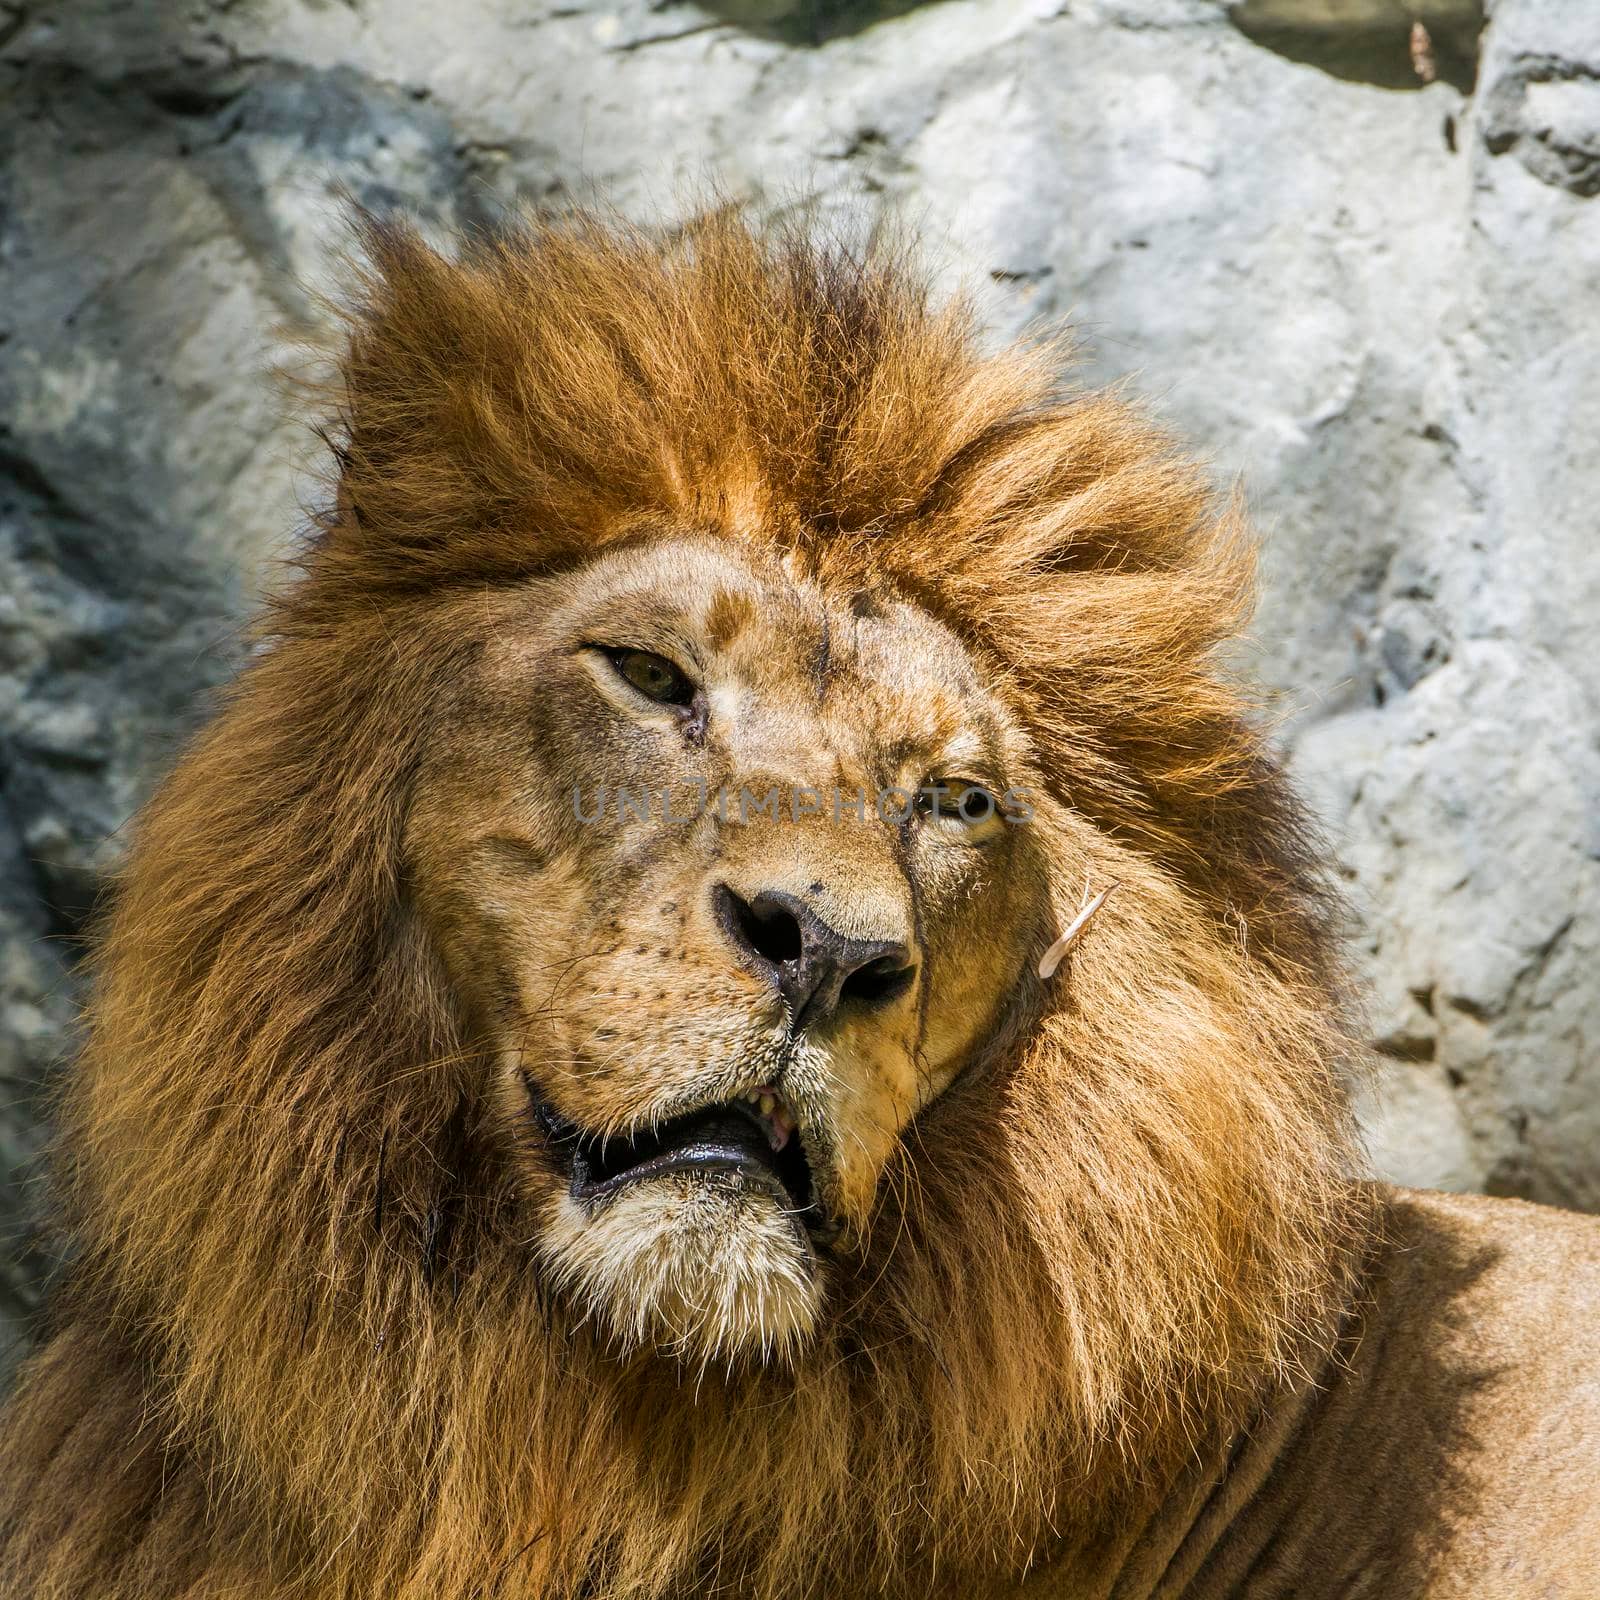 African lion in Chiang Mai zoo, Thailand by PACOCOMO